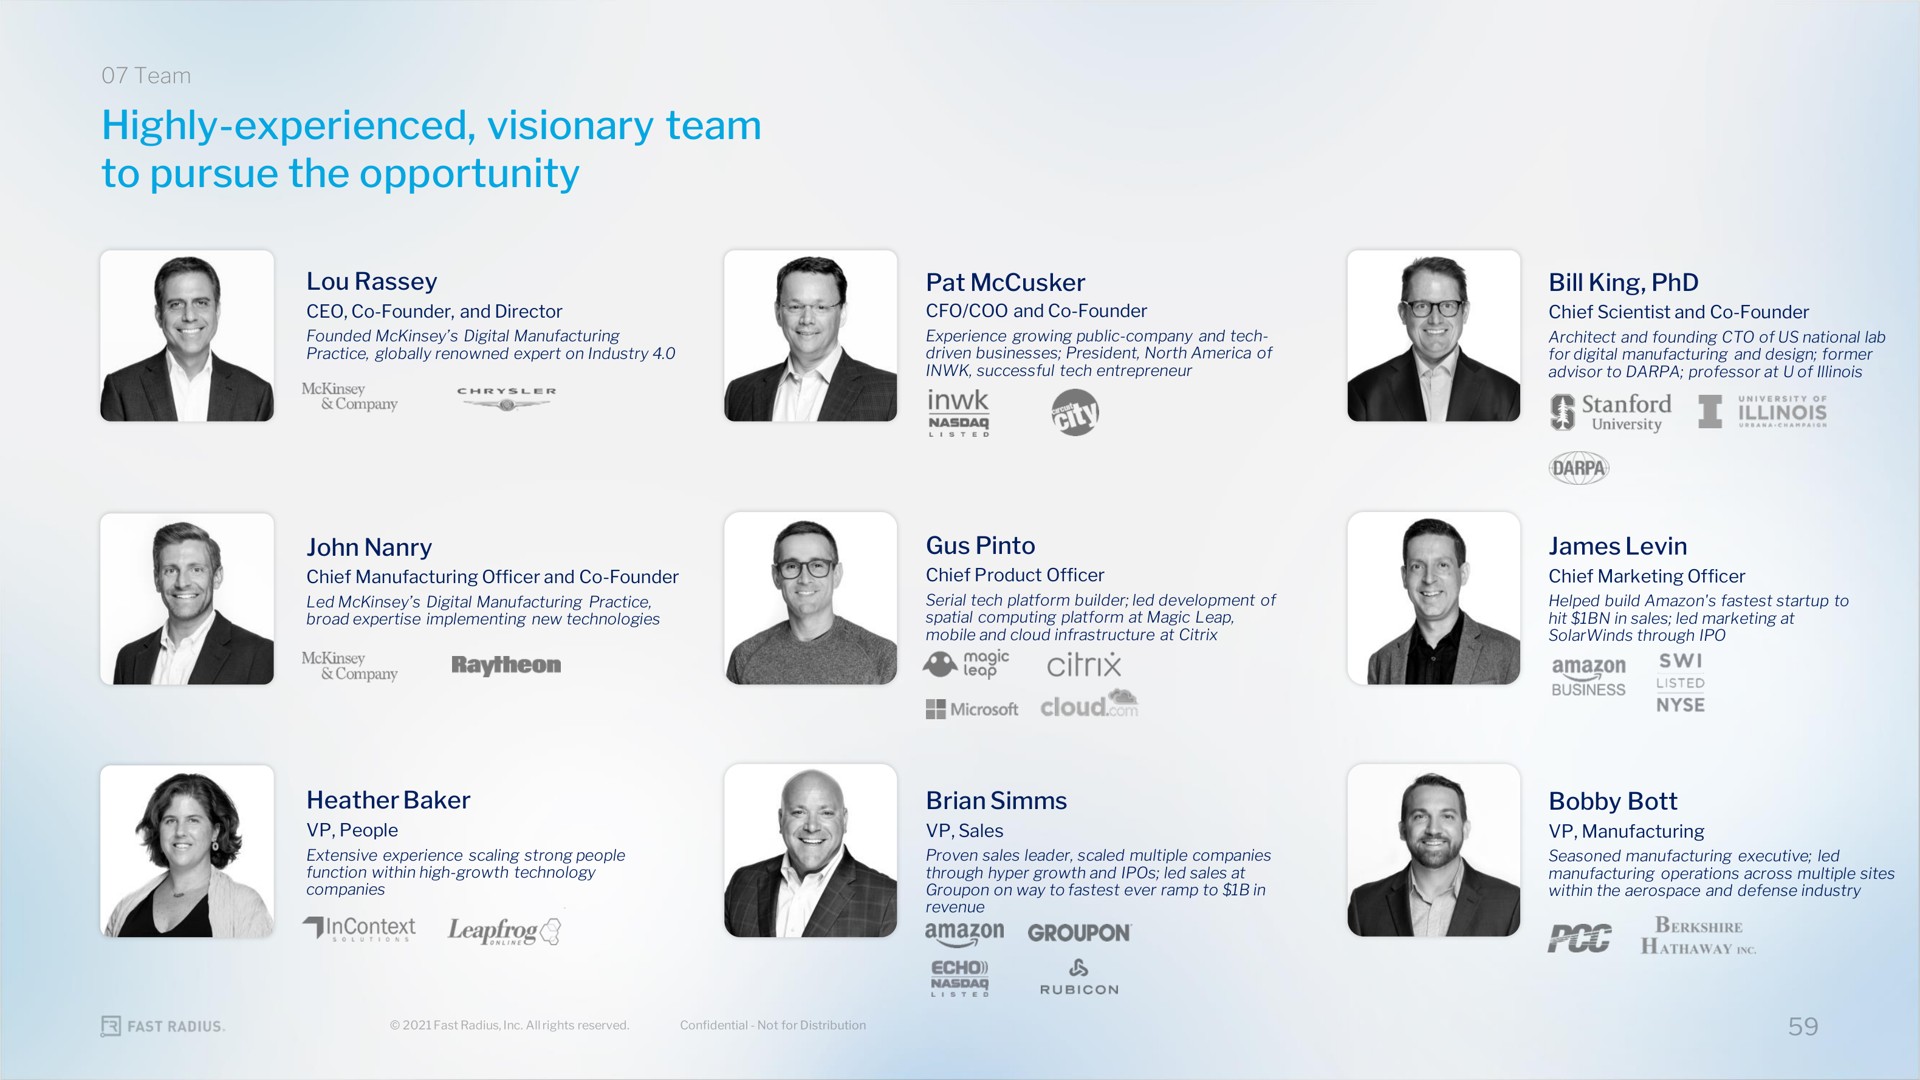 highly experienced visionary team to pursue the opportunity | Fast Radius